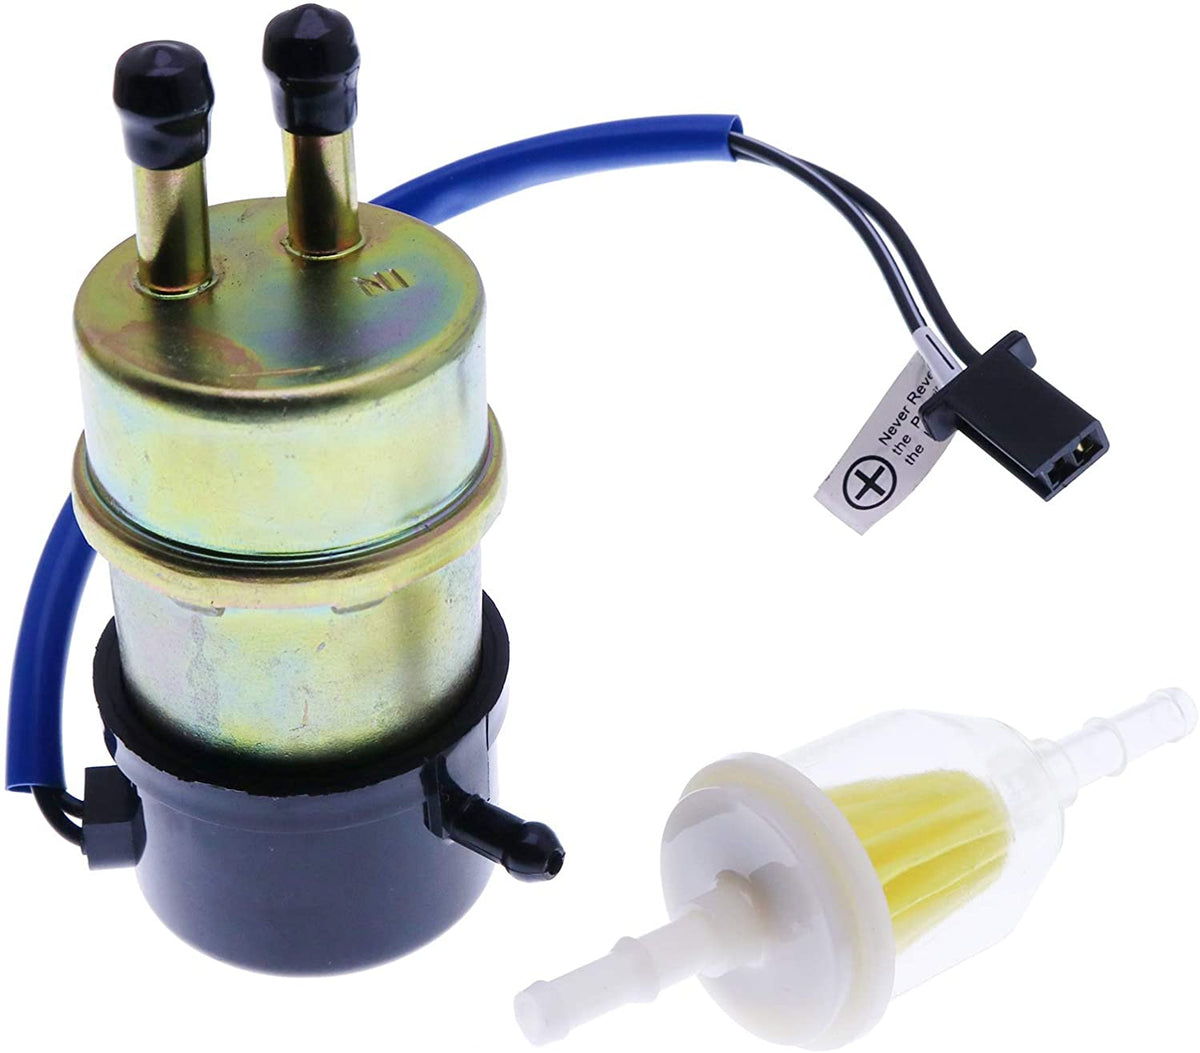 Electric Fuel Pump Kit with 16710-HA7-672 with Fuel Filter AM116304 Compatible with Honda Fourtrax 86-89 TRX-350 TRX-350D TRX 350 350D 4x4 FourTrax Foreman 350 1986-1989 - KUDUPARTS